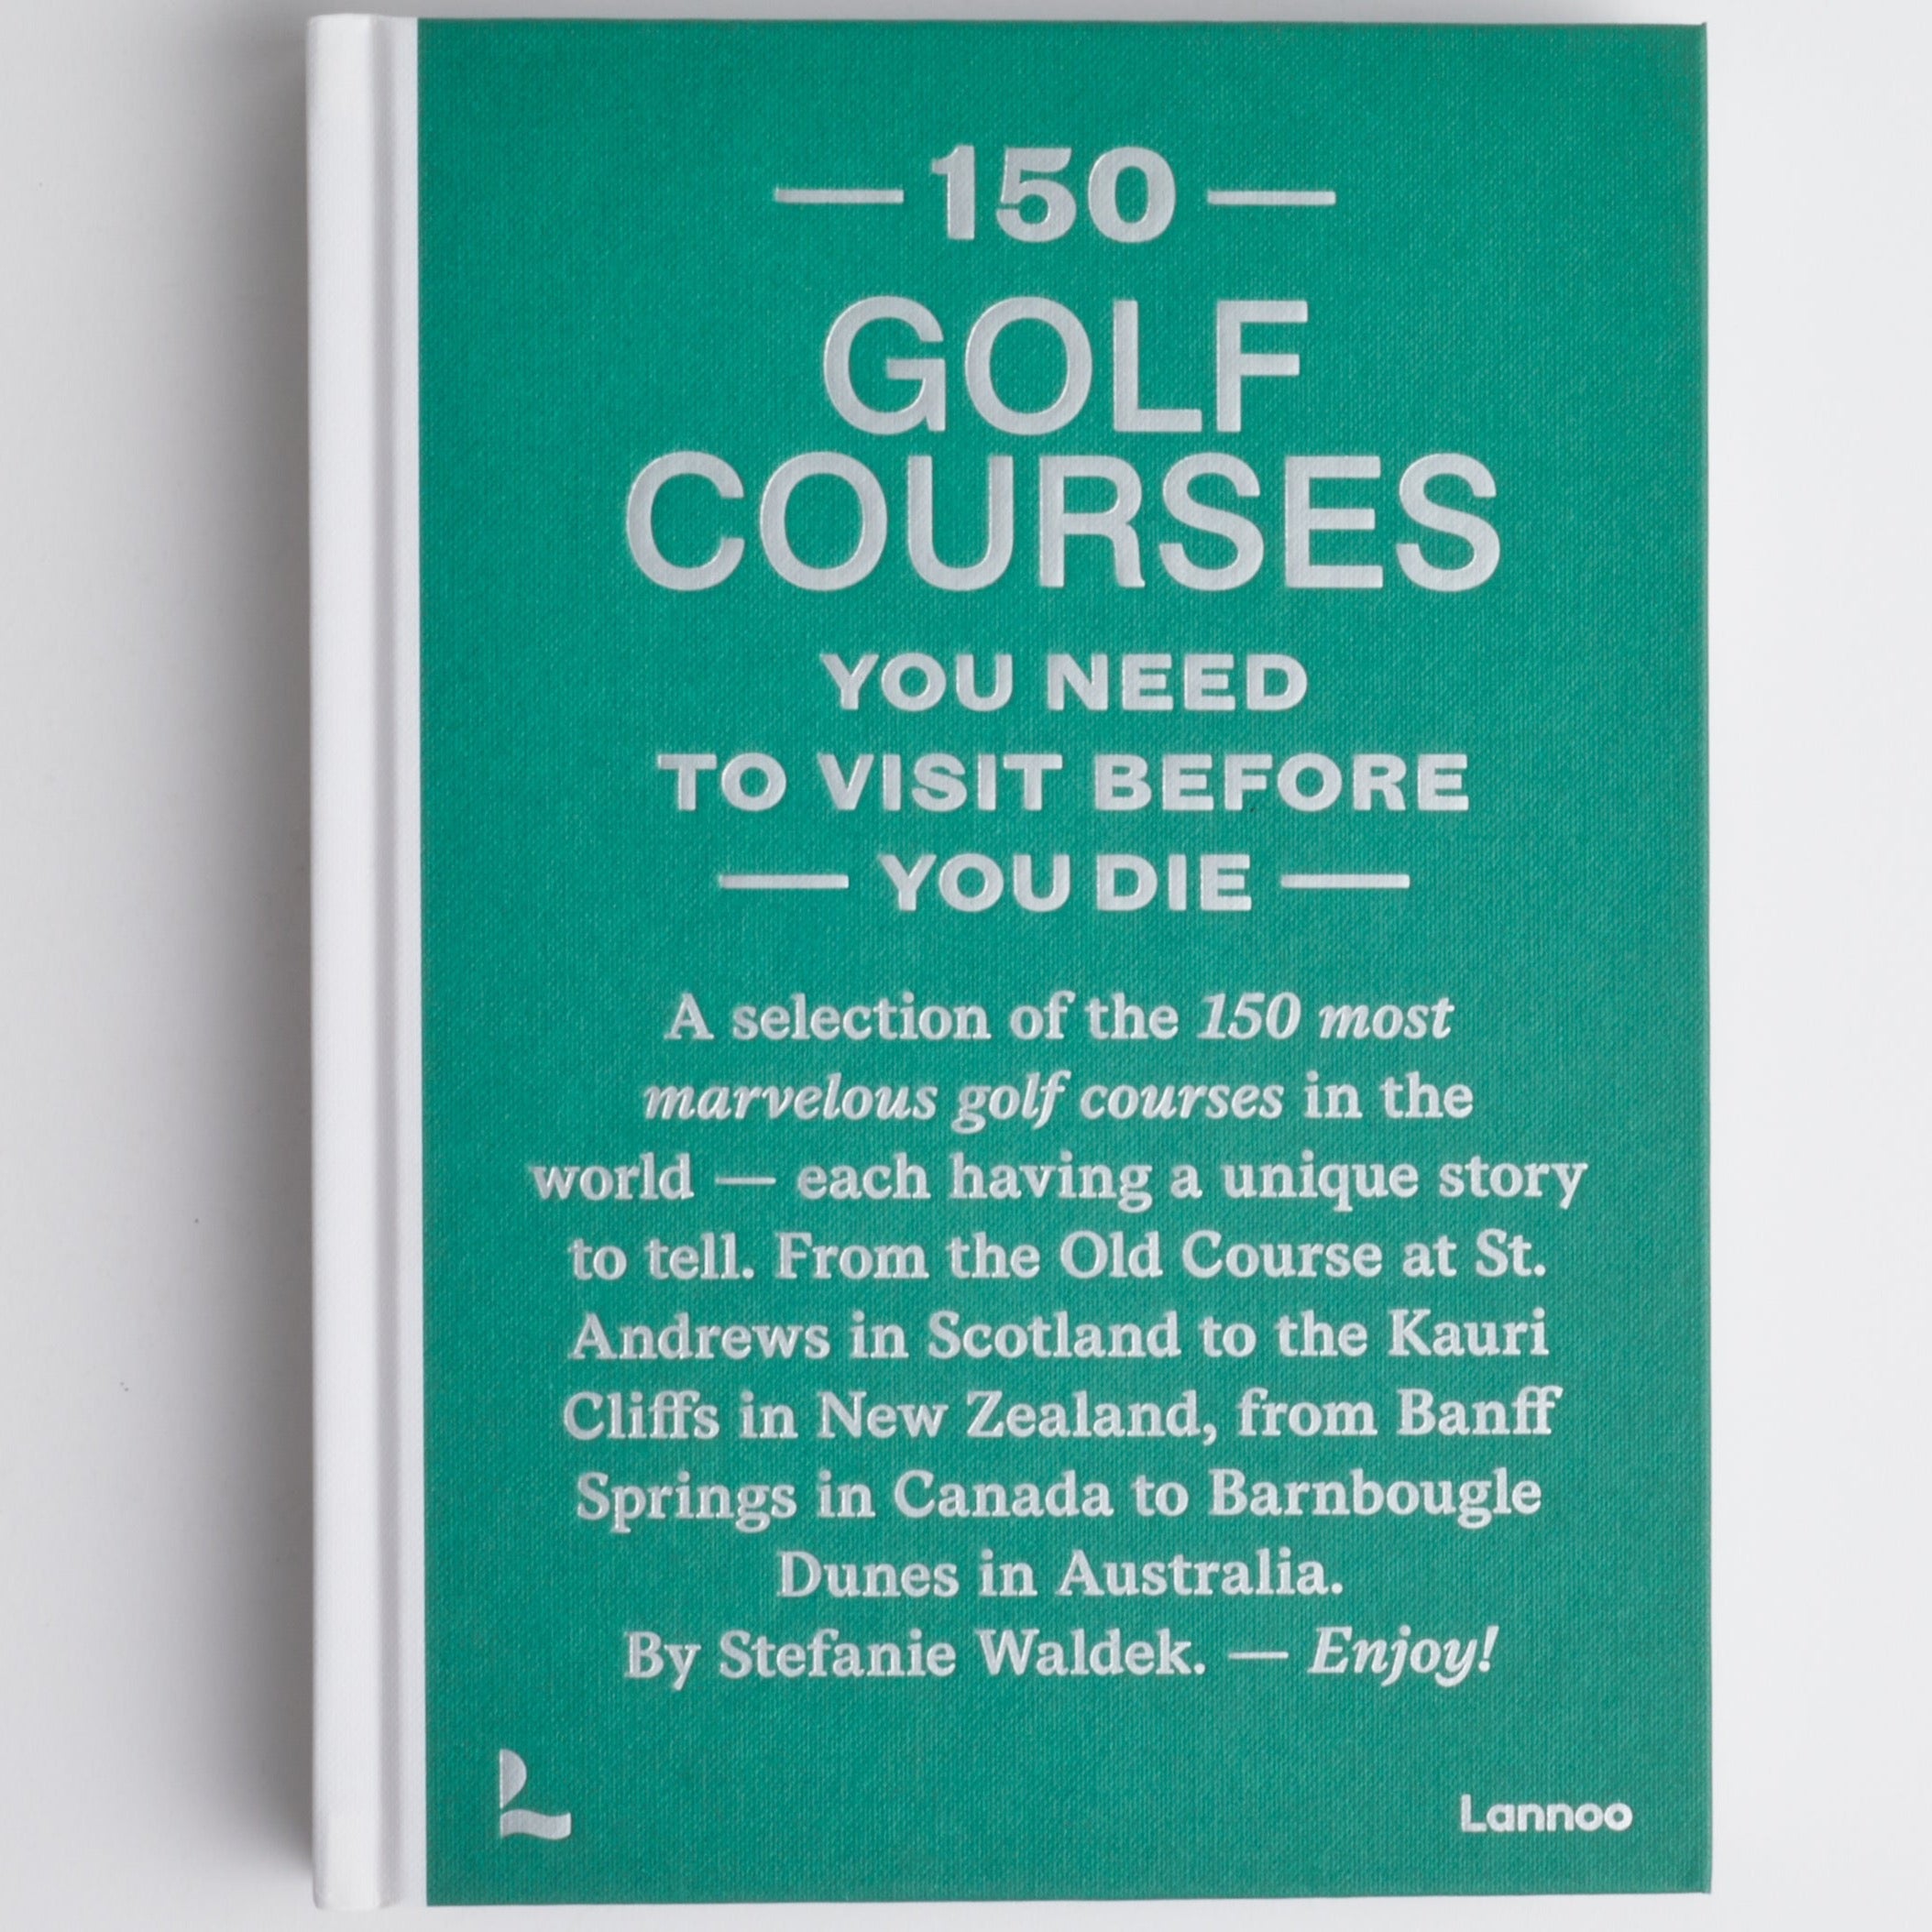 150 Golf Courses You Need to Visit Before You Die book cover